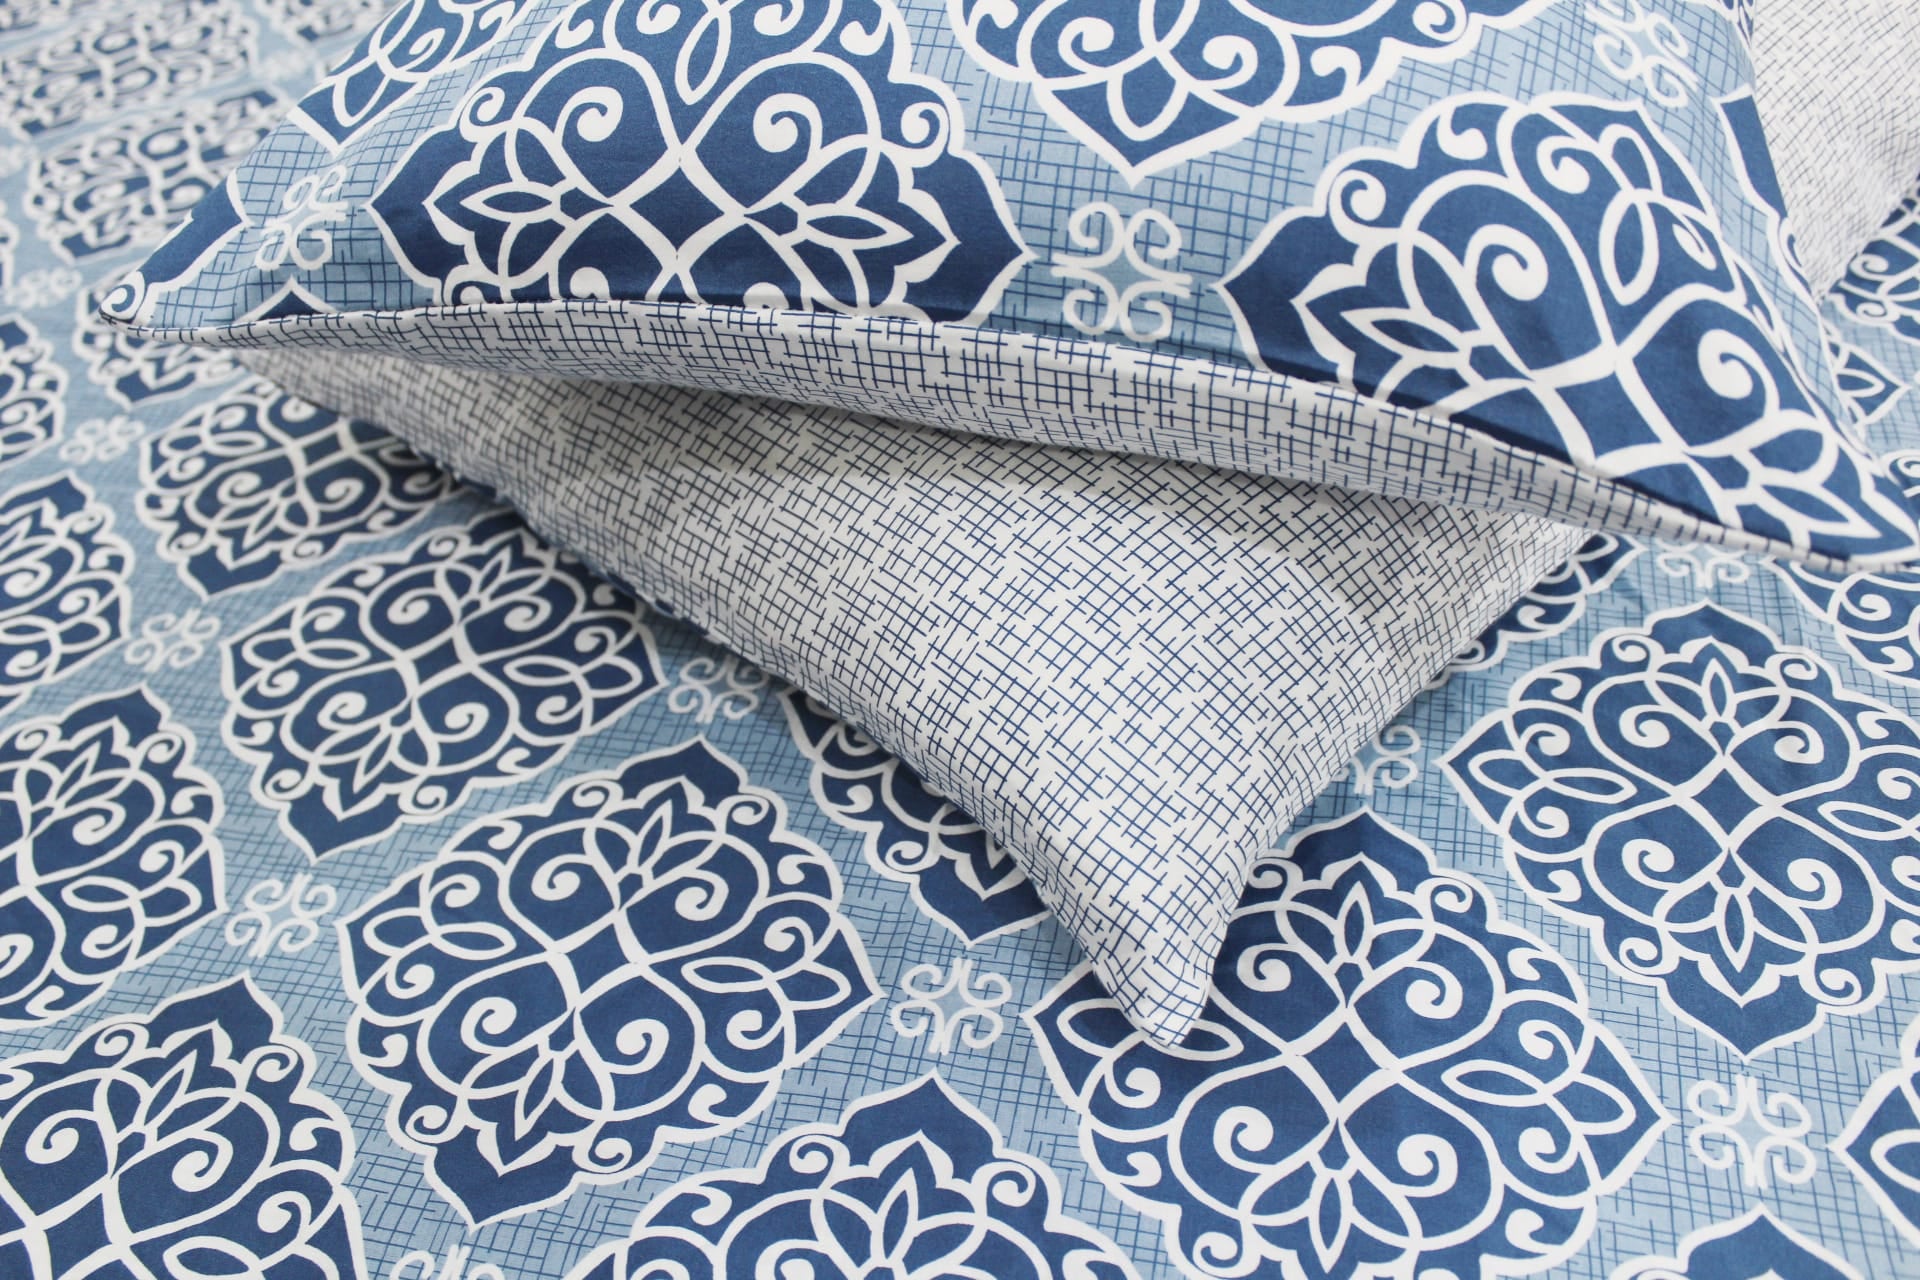 Soft Cotton Printed 300 TC Modern Satin Fitted Bedsheet In Blue At Best Prices